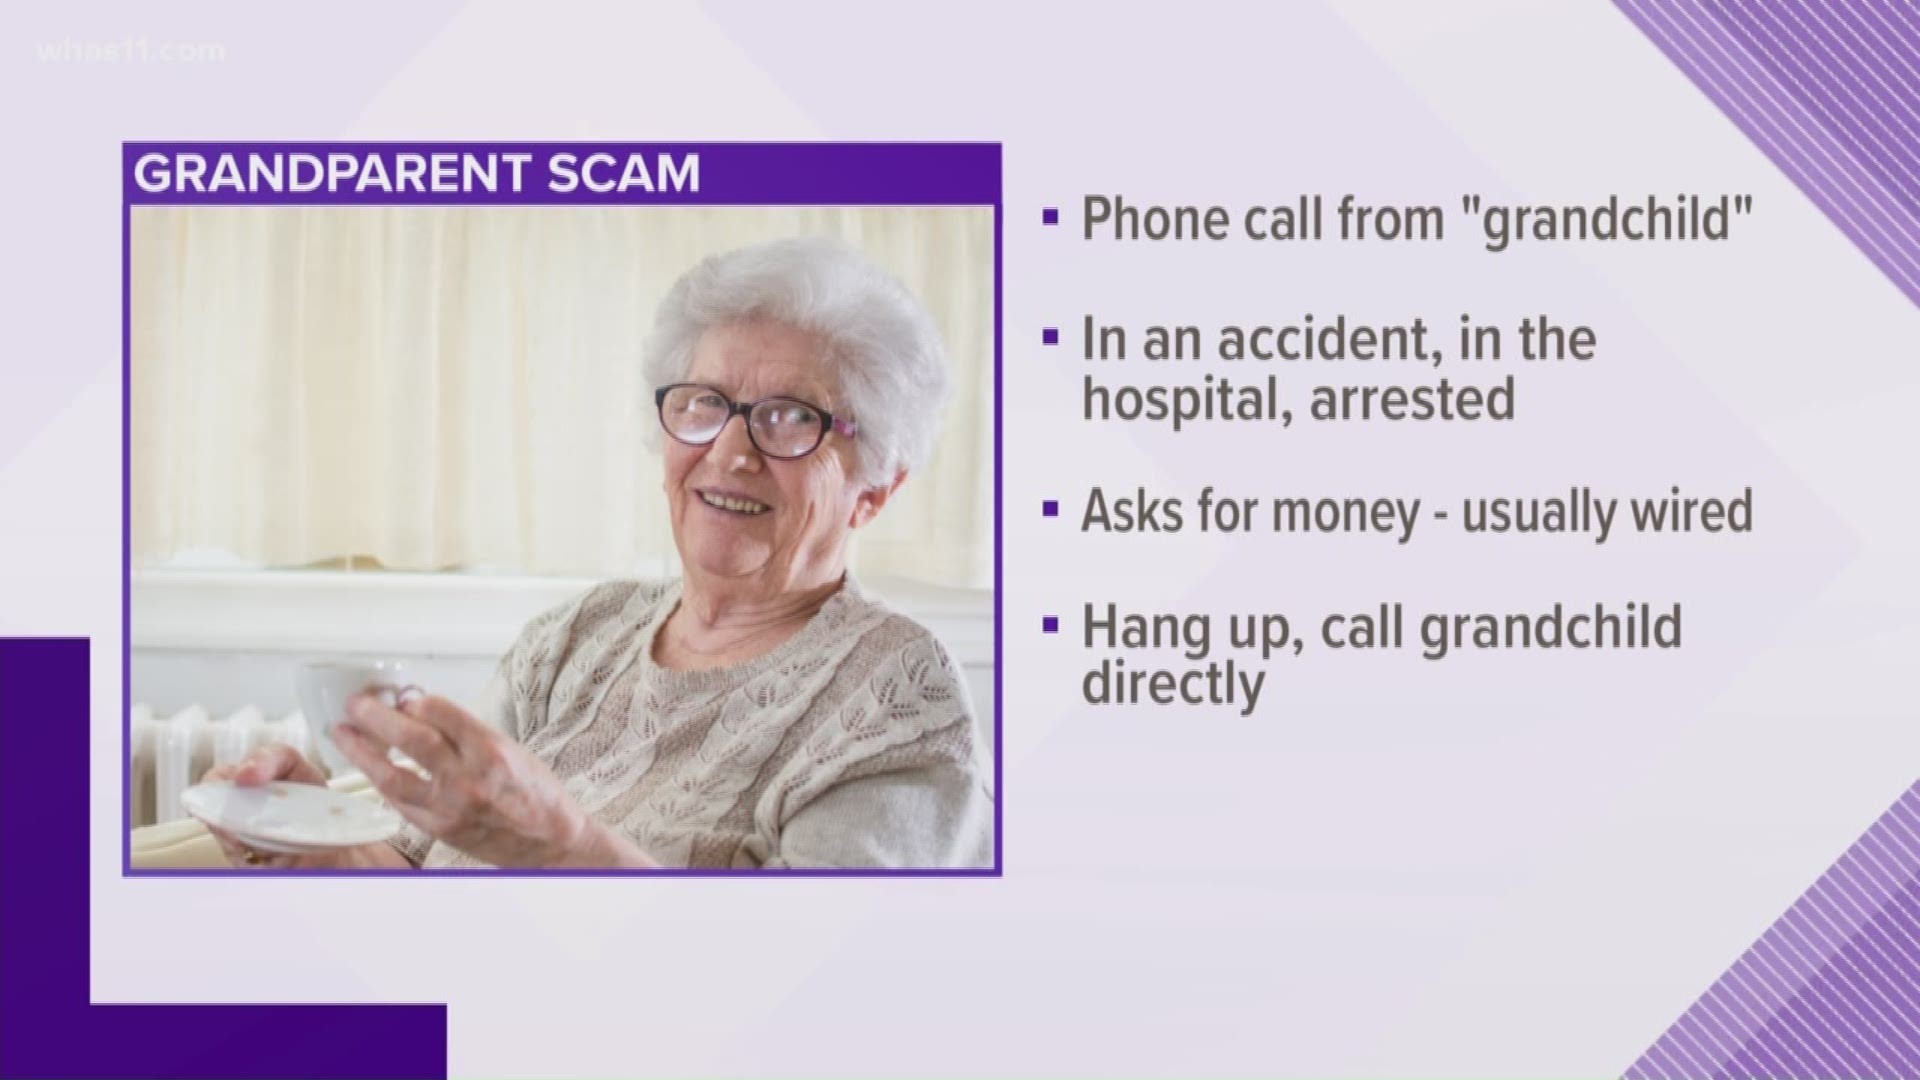 The BBB said some scams you need to look out for inlcude the grandparent and Publisher's Clearing House scam. Better Business Bureau President adn CEO Reanna Smith-Hamblin explains.